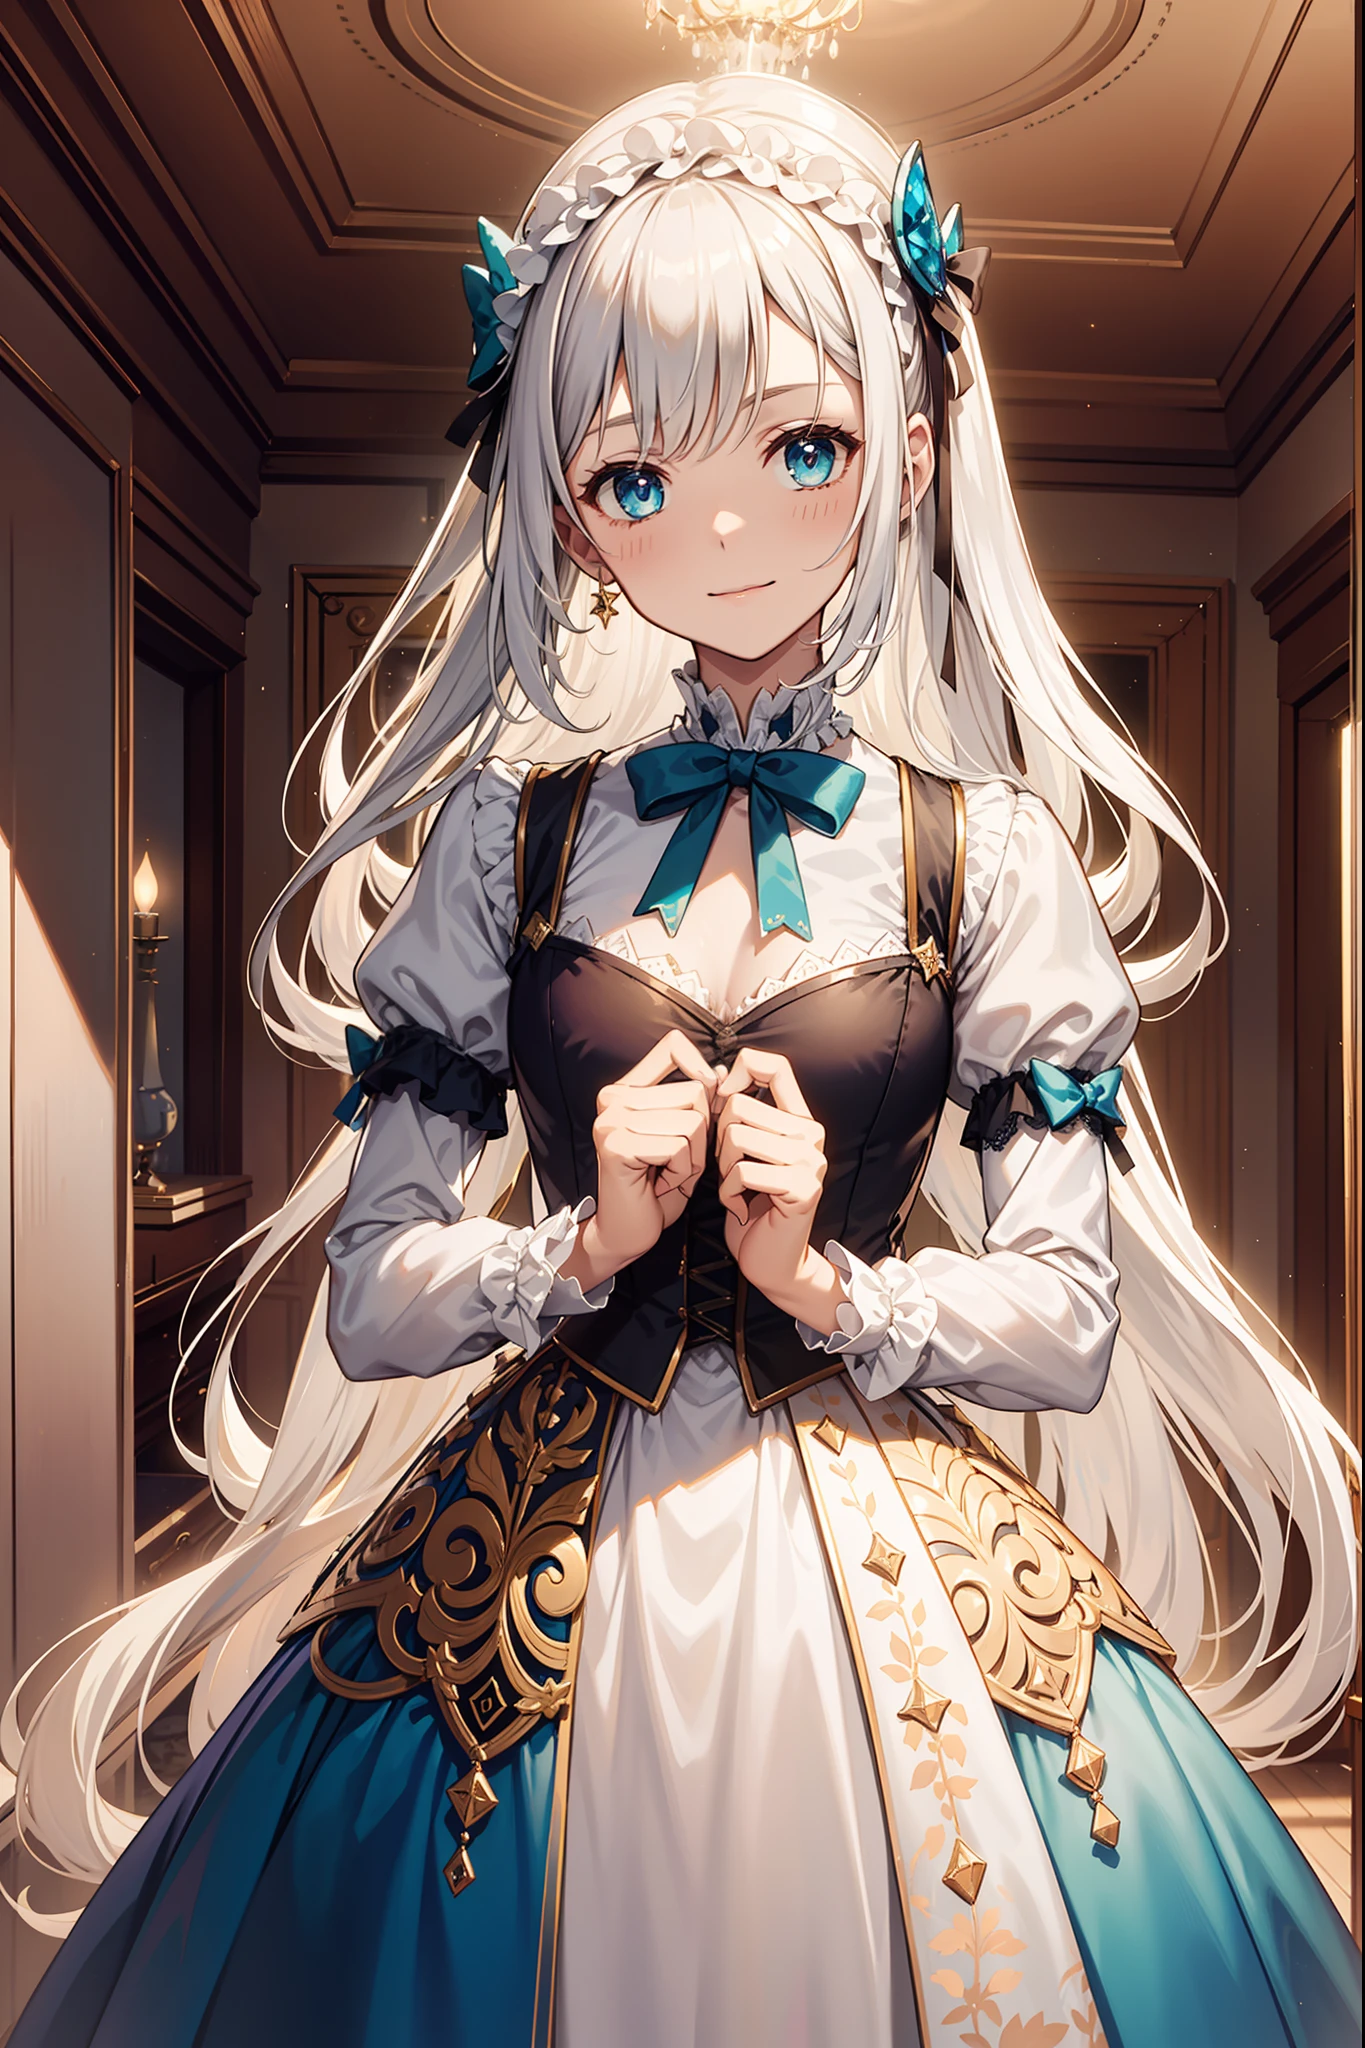 saints，Enchanted，having fun，Being in love，(White Victorian dress)，silber hair，eBlue eyes，Seductive pose,Aqua blue stripes，Ruffles，Lace，A small amount of ribbon，jewel embellishment，Floral decoration，Fabric headdress，Bow knot，exquisite costumes，A small amount of transparent clothing，inside in room，solo person